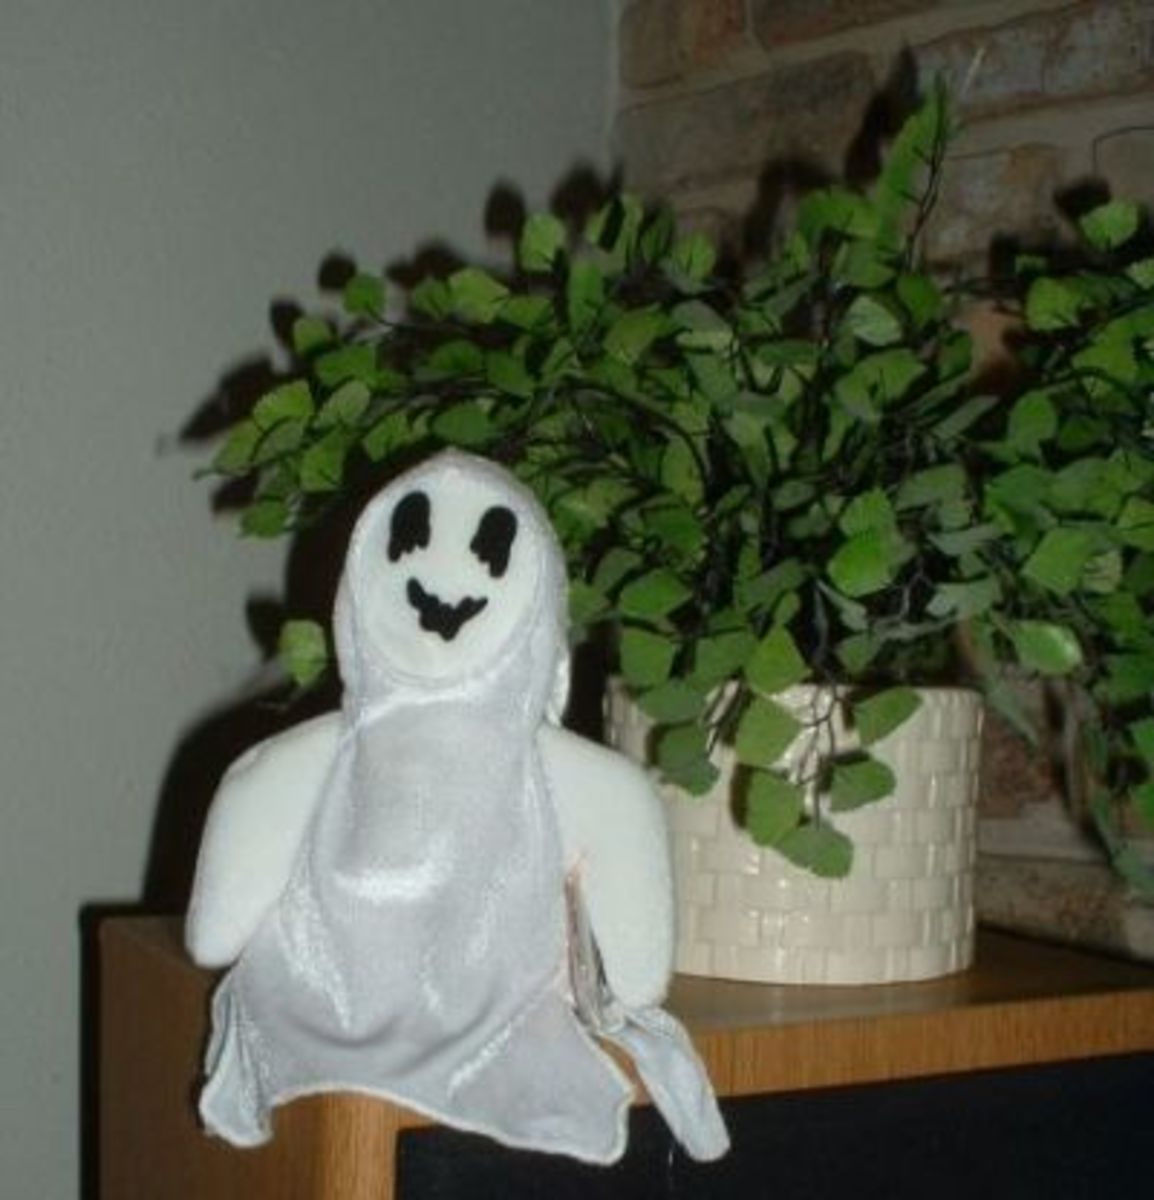 The (friendly?) ghost